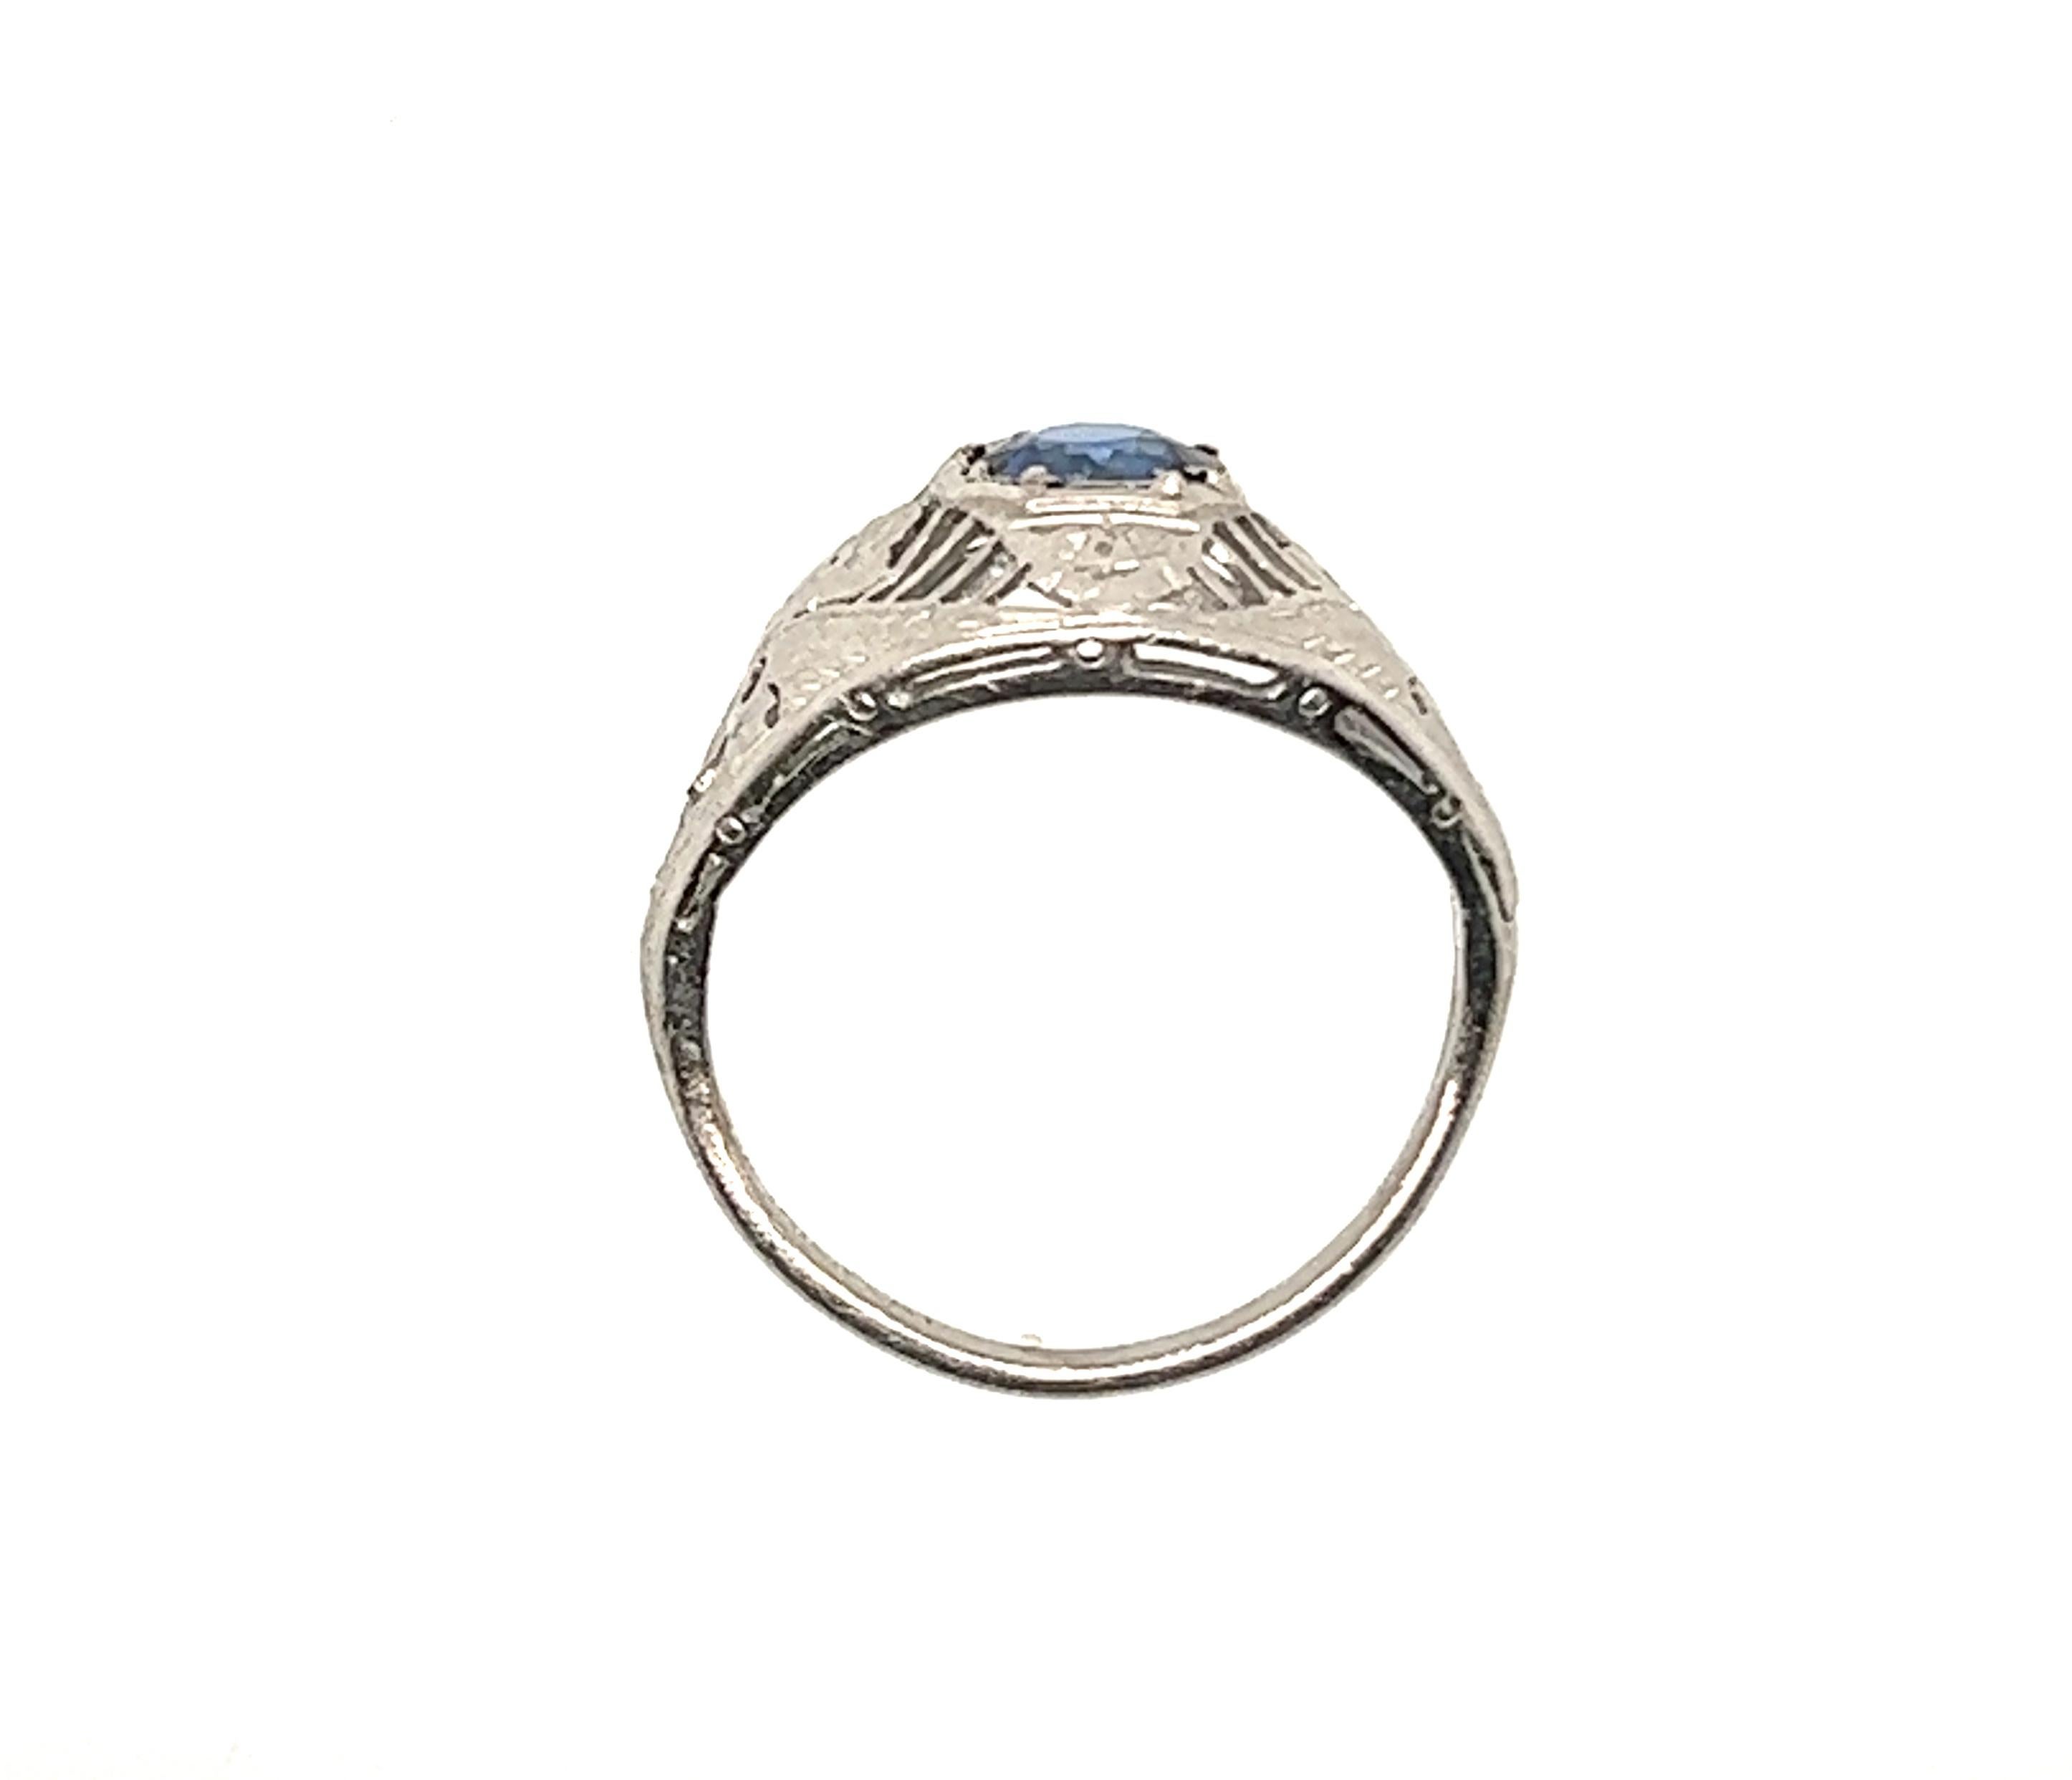 Art Deco Sapphire Ring .52ct Vintage Antique Flowers Platinum 


Featuring a Gorgeous .52ct Genuine Natural Blue Round Sapphire Center

Incredible Hand Engraved Flowers

Stunning Hand Filigree

Classic Bombe Shaped ring

100% Natural Sapphire

.52